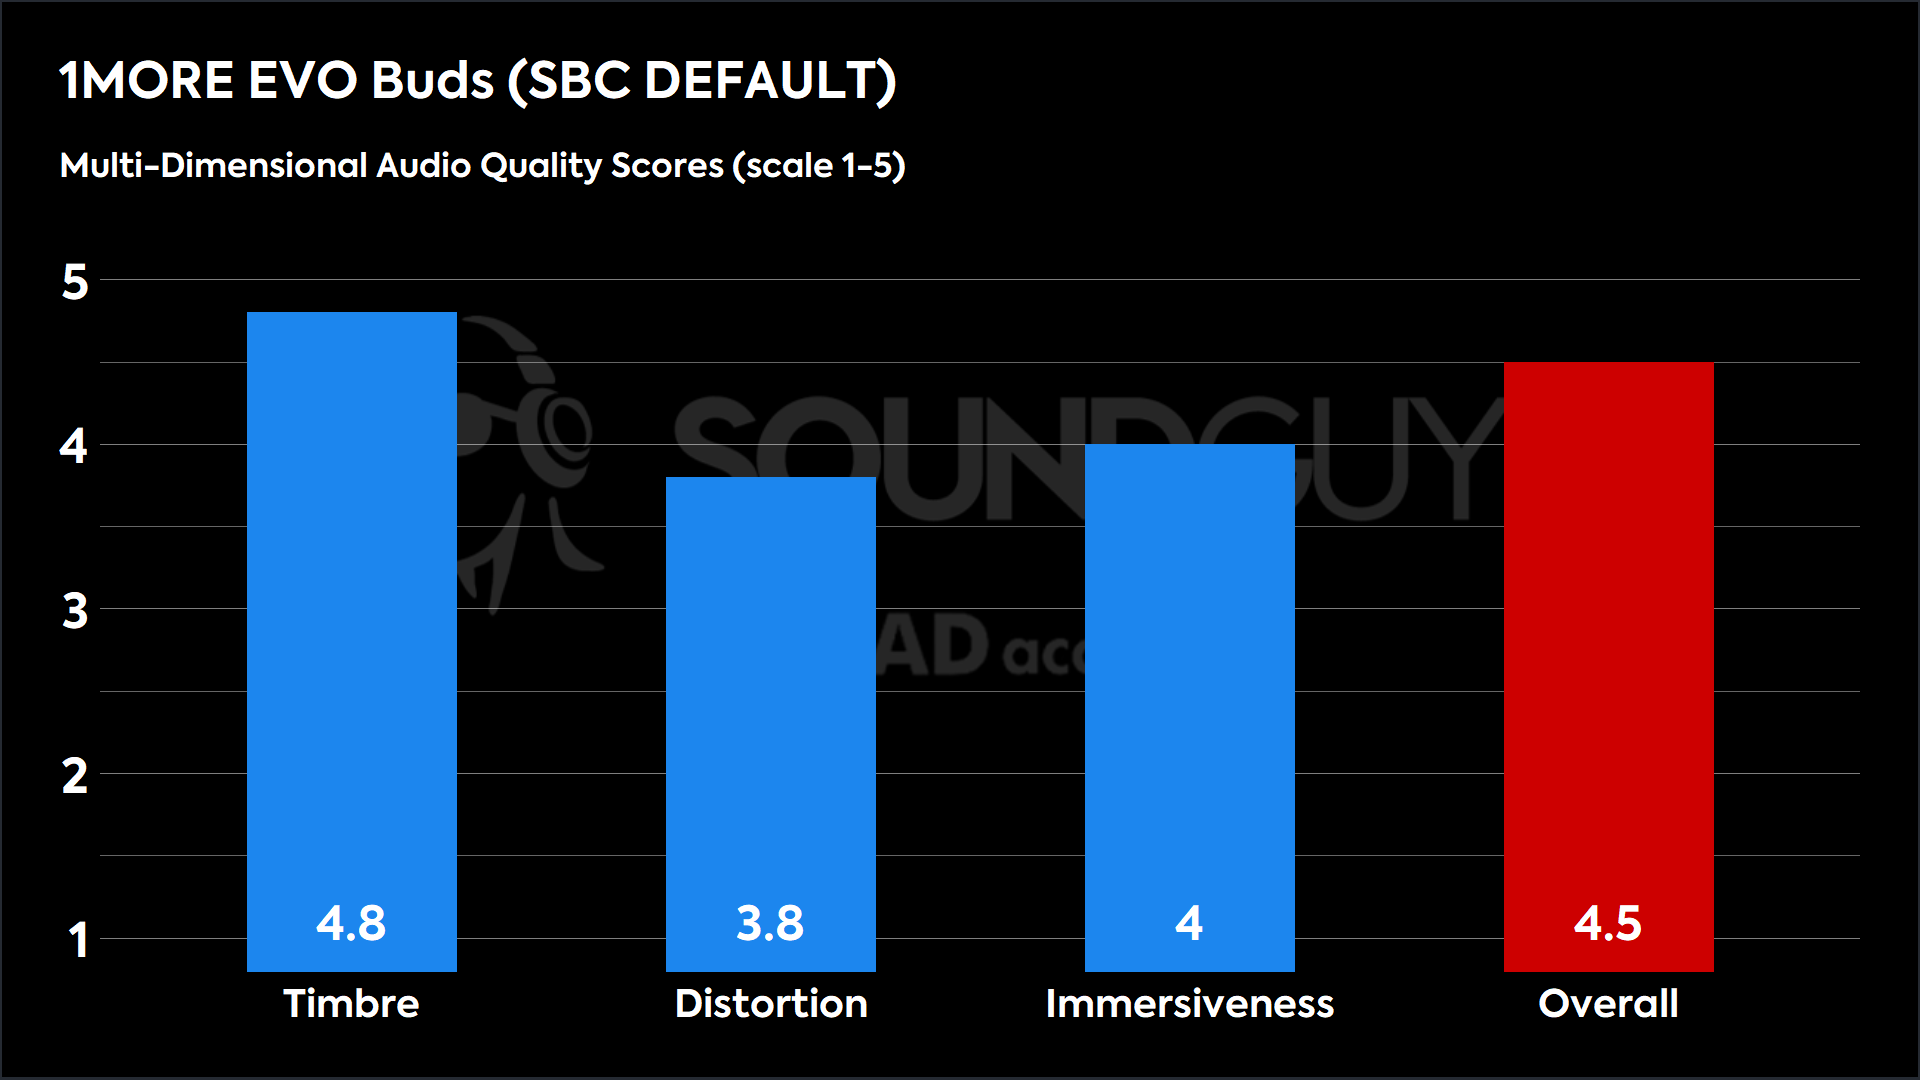 This chart shows the MDAQS results for the 1MORE EVO Buds in SBC DEFAULT mode. The Timbre score is 4.8, The Distortion score is 3.8, the Immersiveness score is 4, and the Overall Score is 4.5).